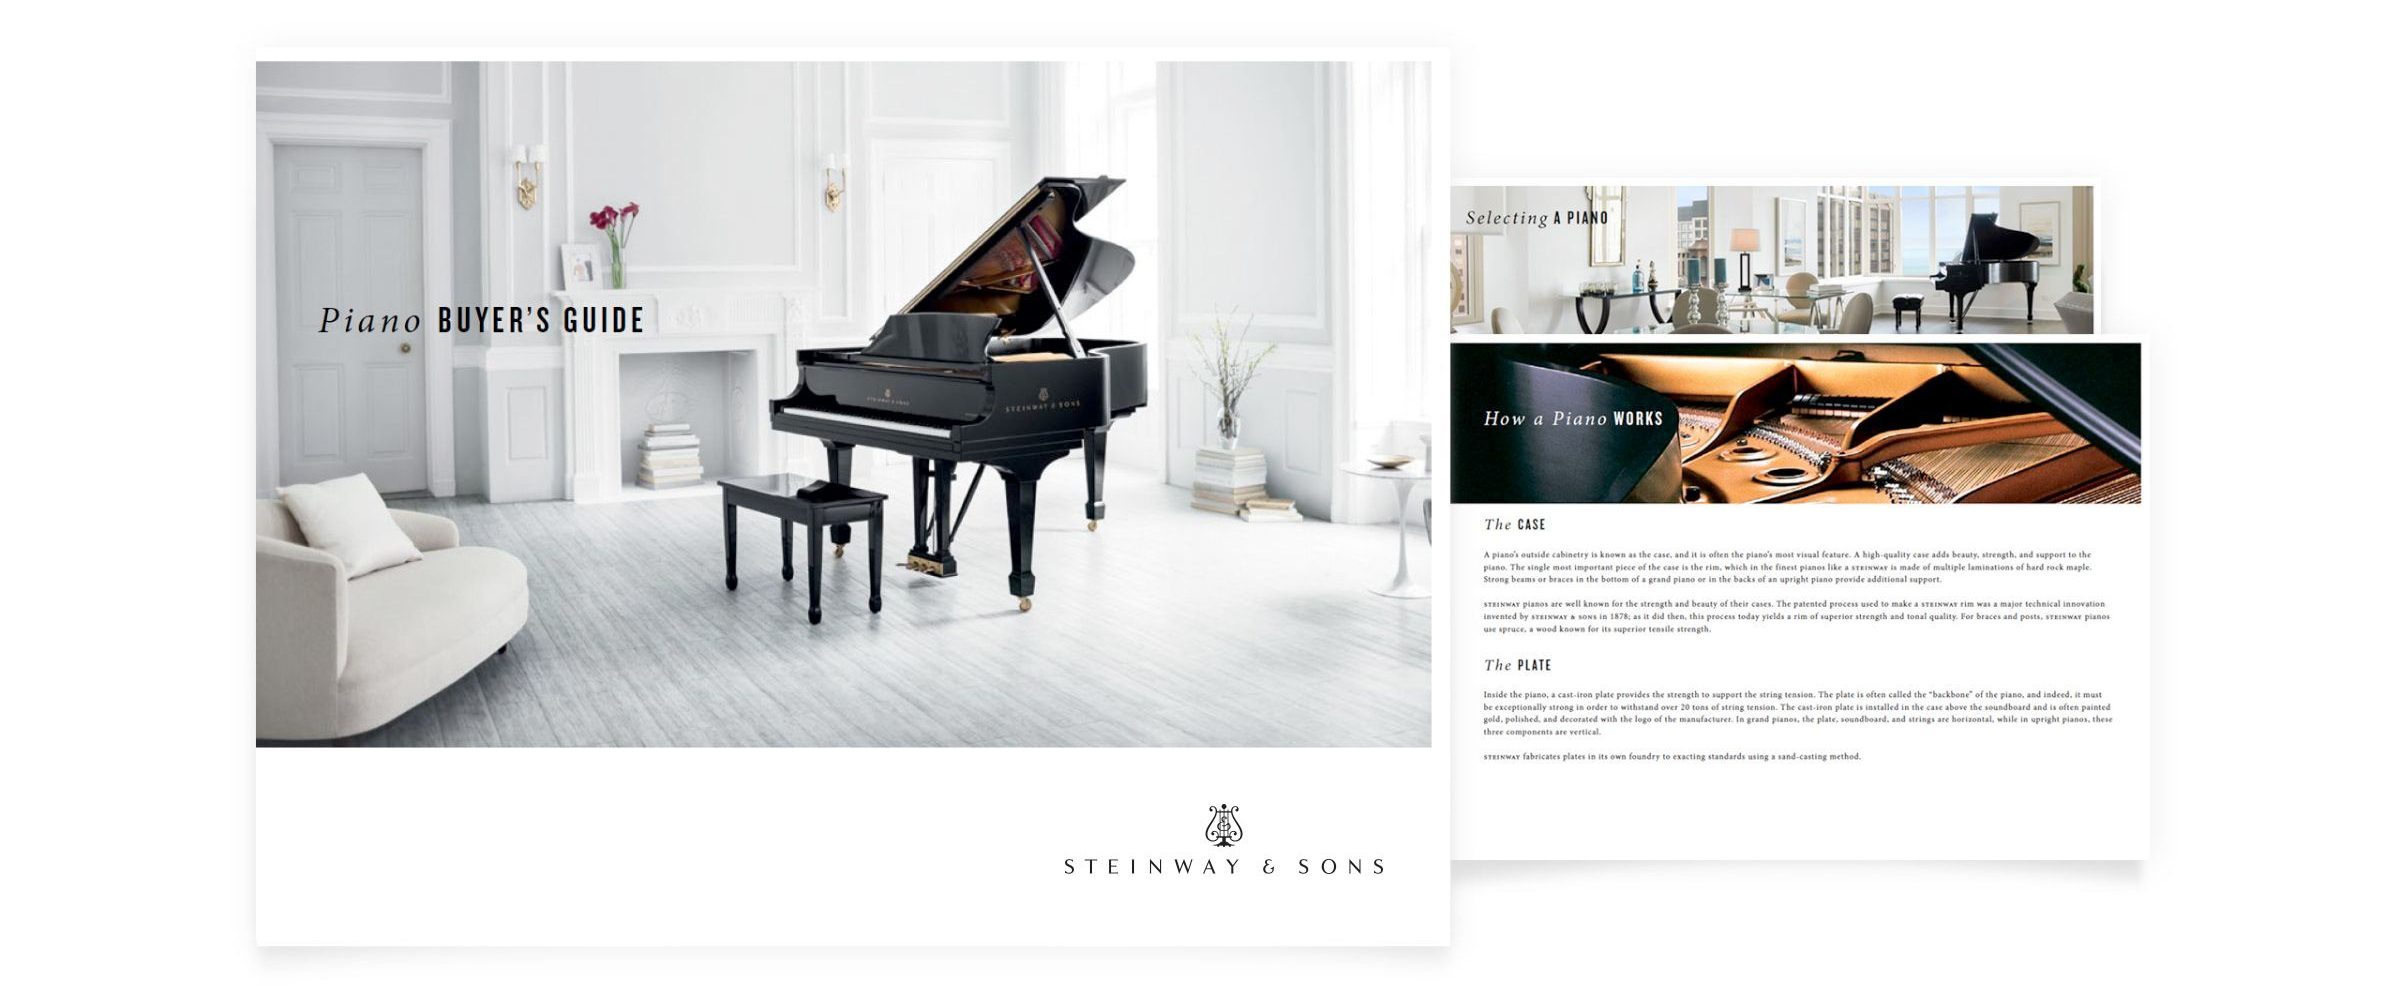 Steinway Piano Buyer's Guide - How to Select and Buy a Piano